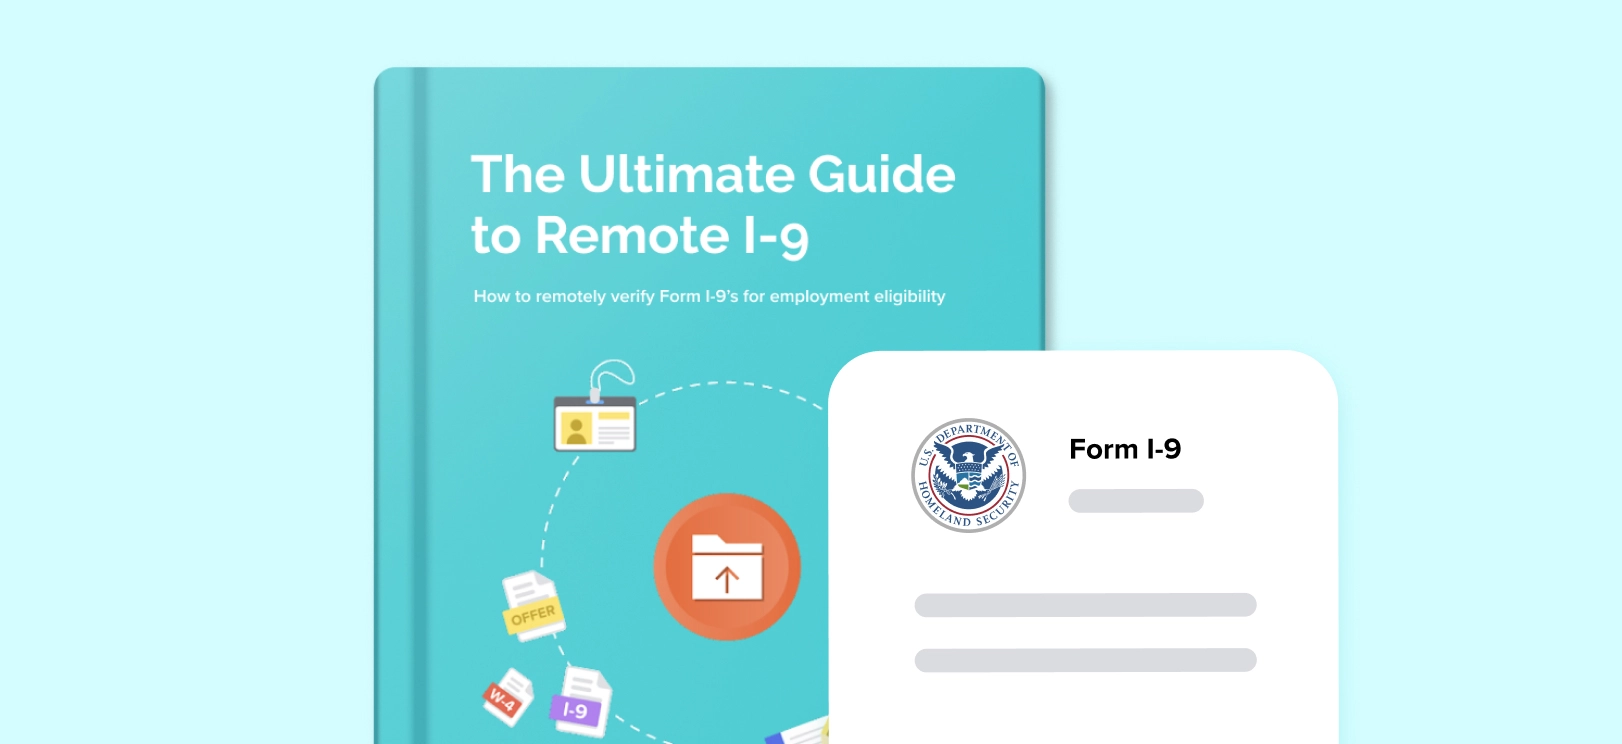 Guide: How to Remotely Verify Form I-9’s for Employment Eligibility